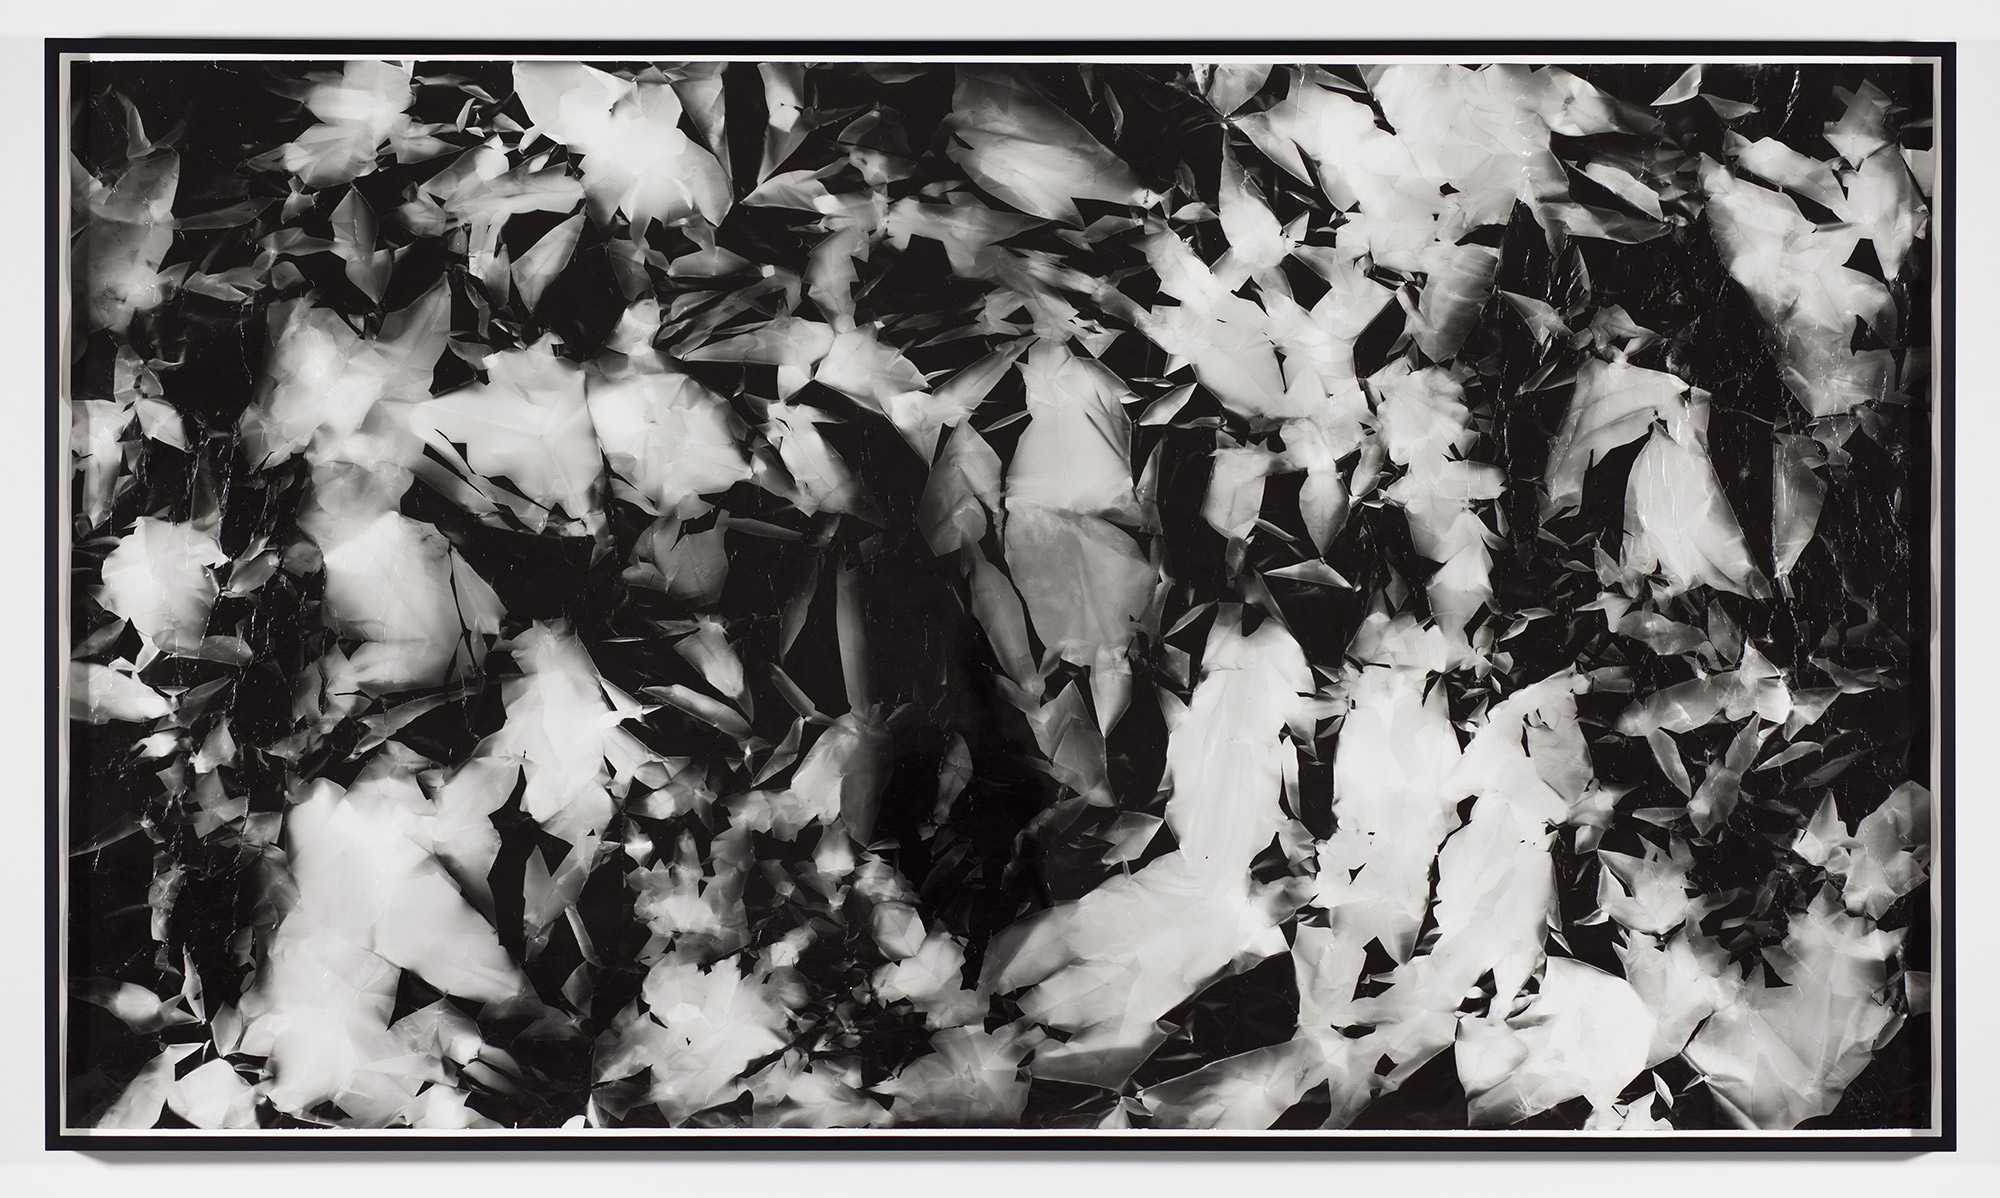   Picture Made by My Hand with the Assistance of Light    2011   Black and white fiber based photographic paper  55 x 98 1/4 inches   Pictures Made by My Hand with the Assistance of Light, 2005–2014     